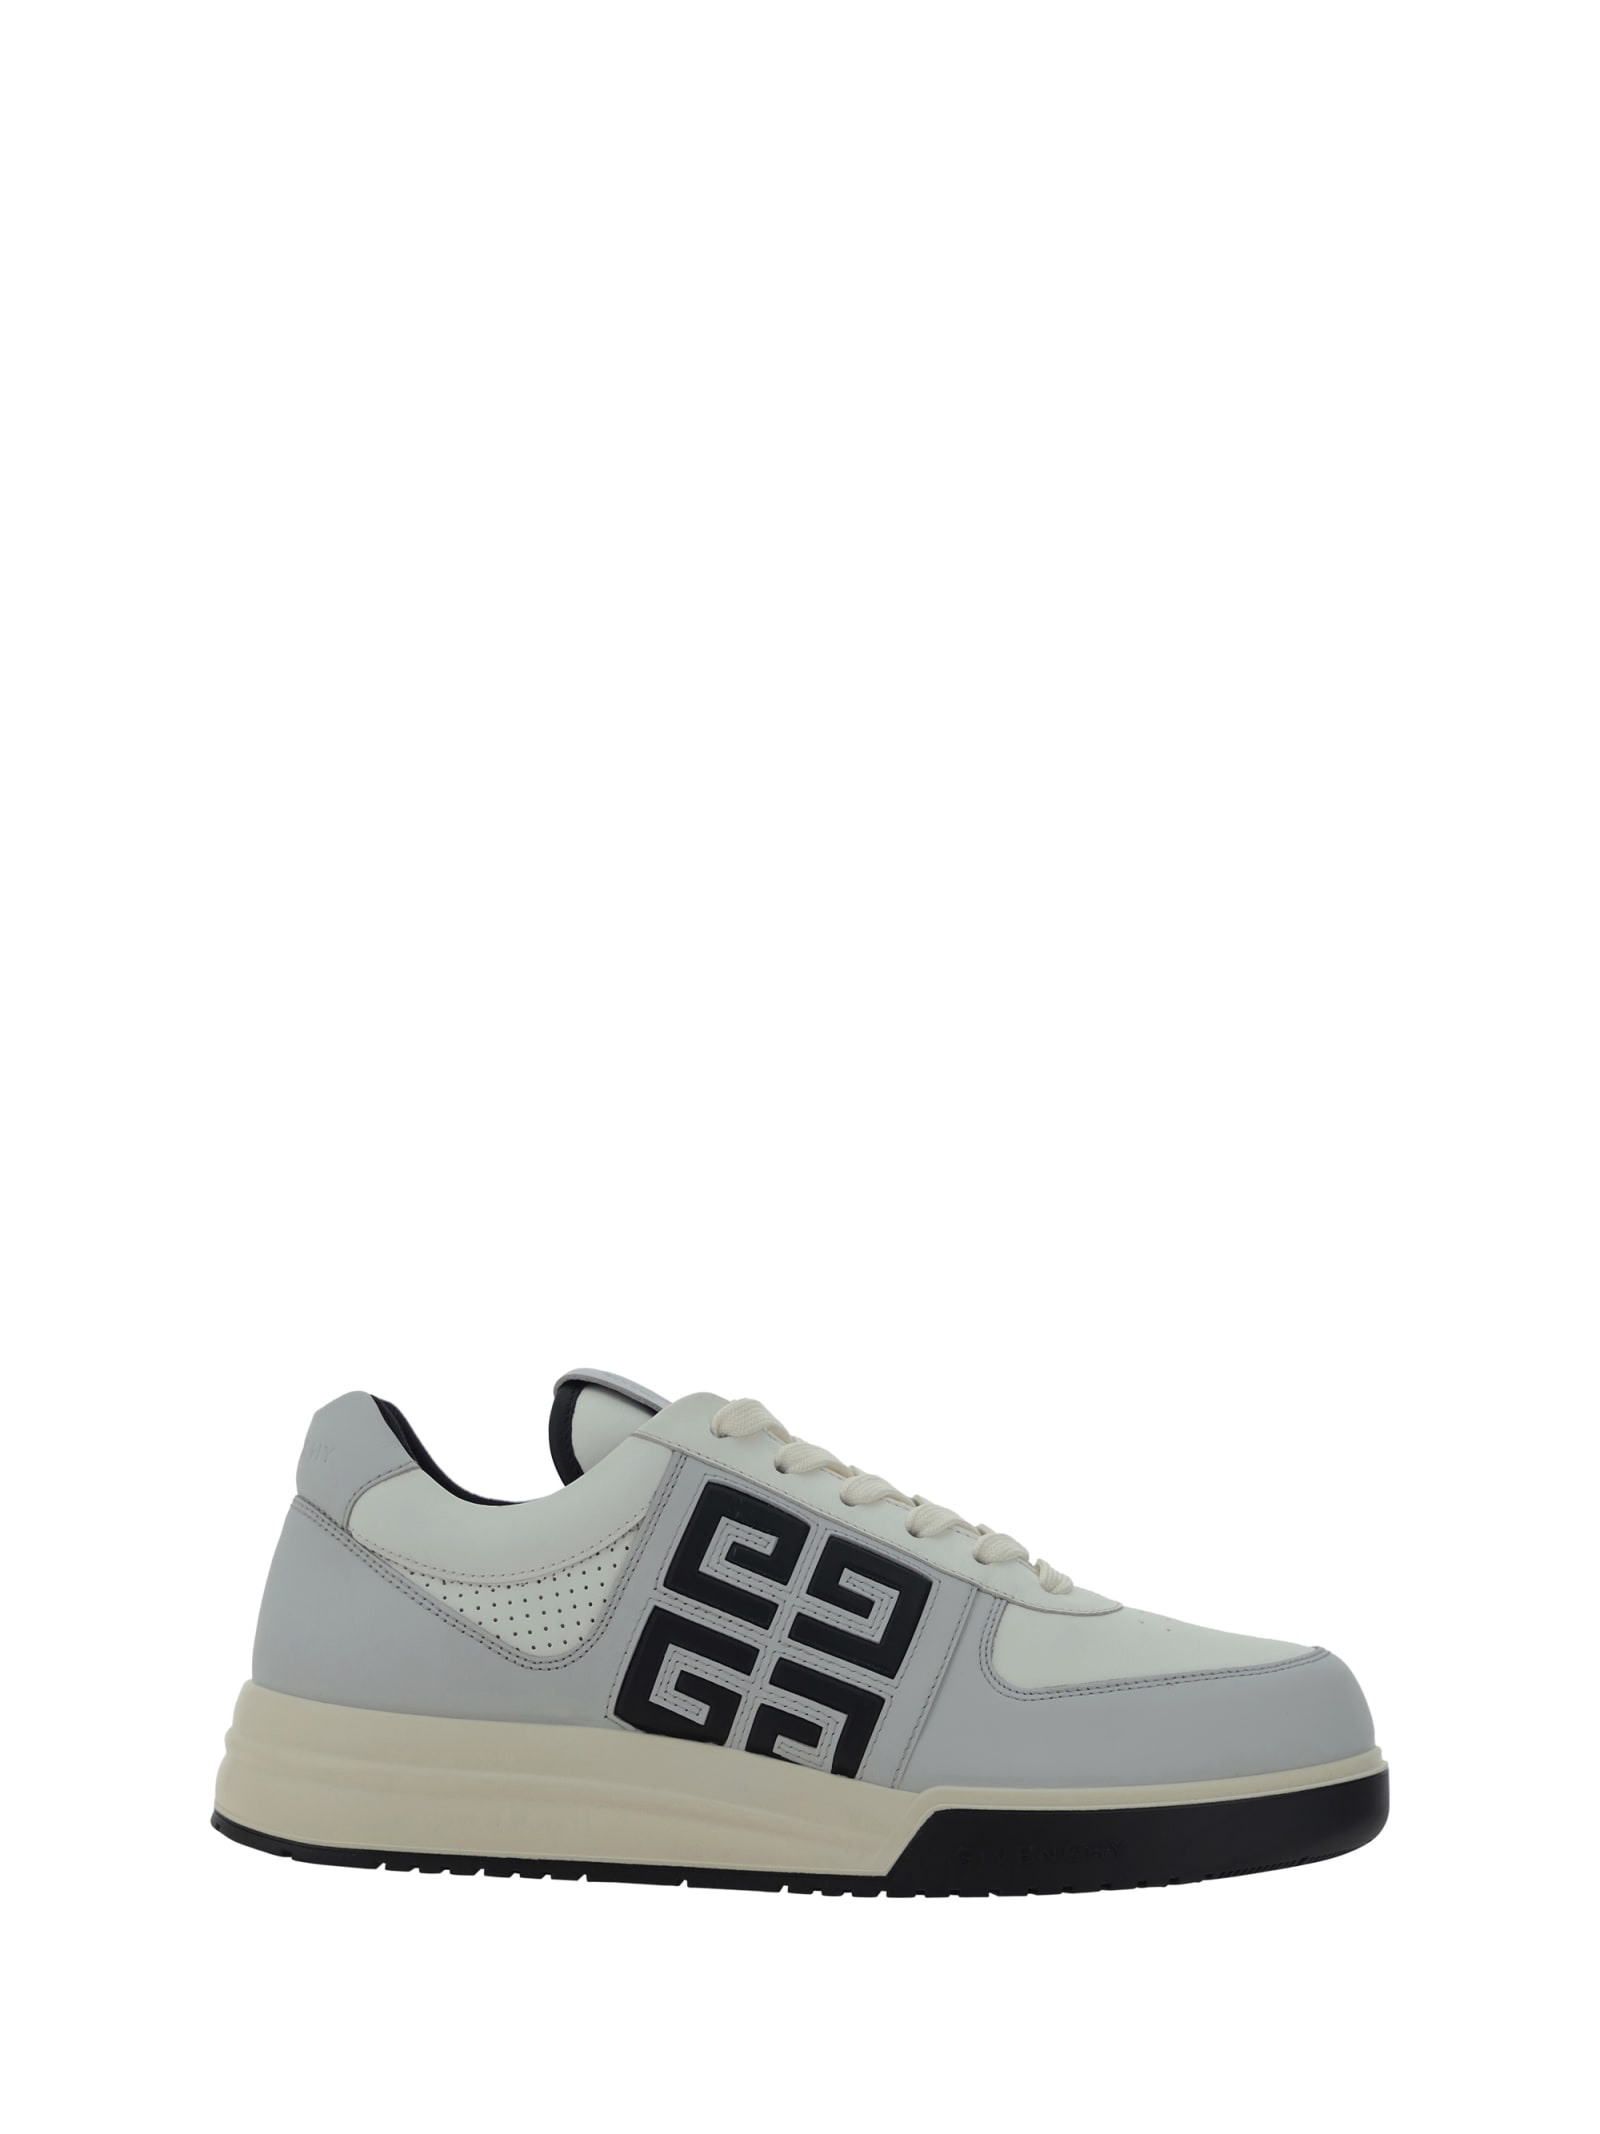 GIVENCHY G4 LOW TOP SNEAKERS